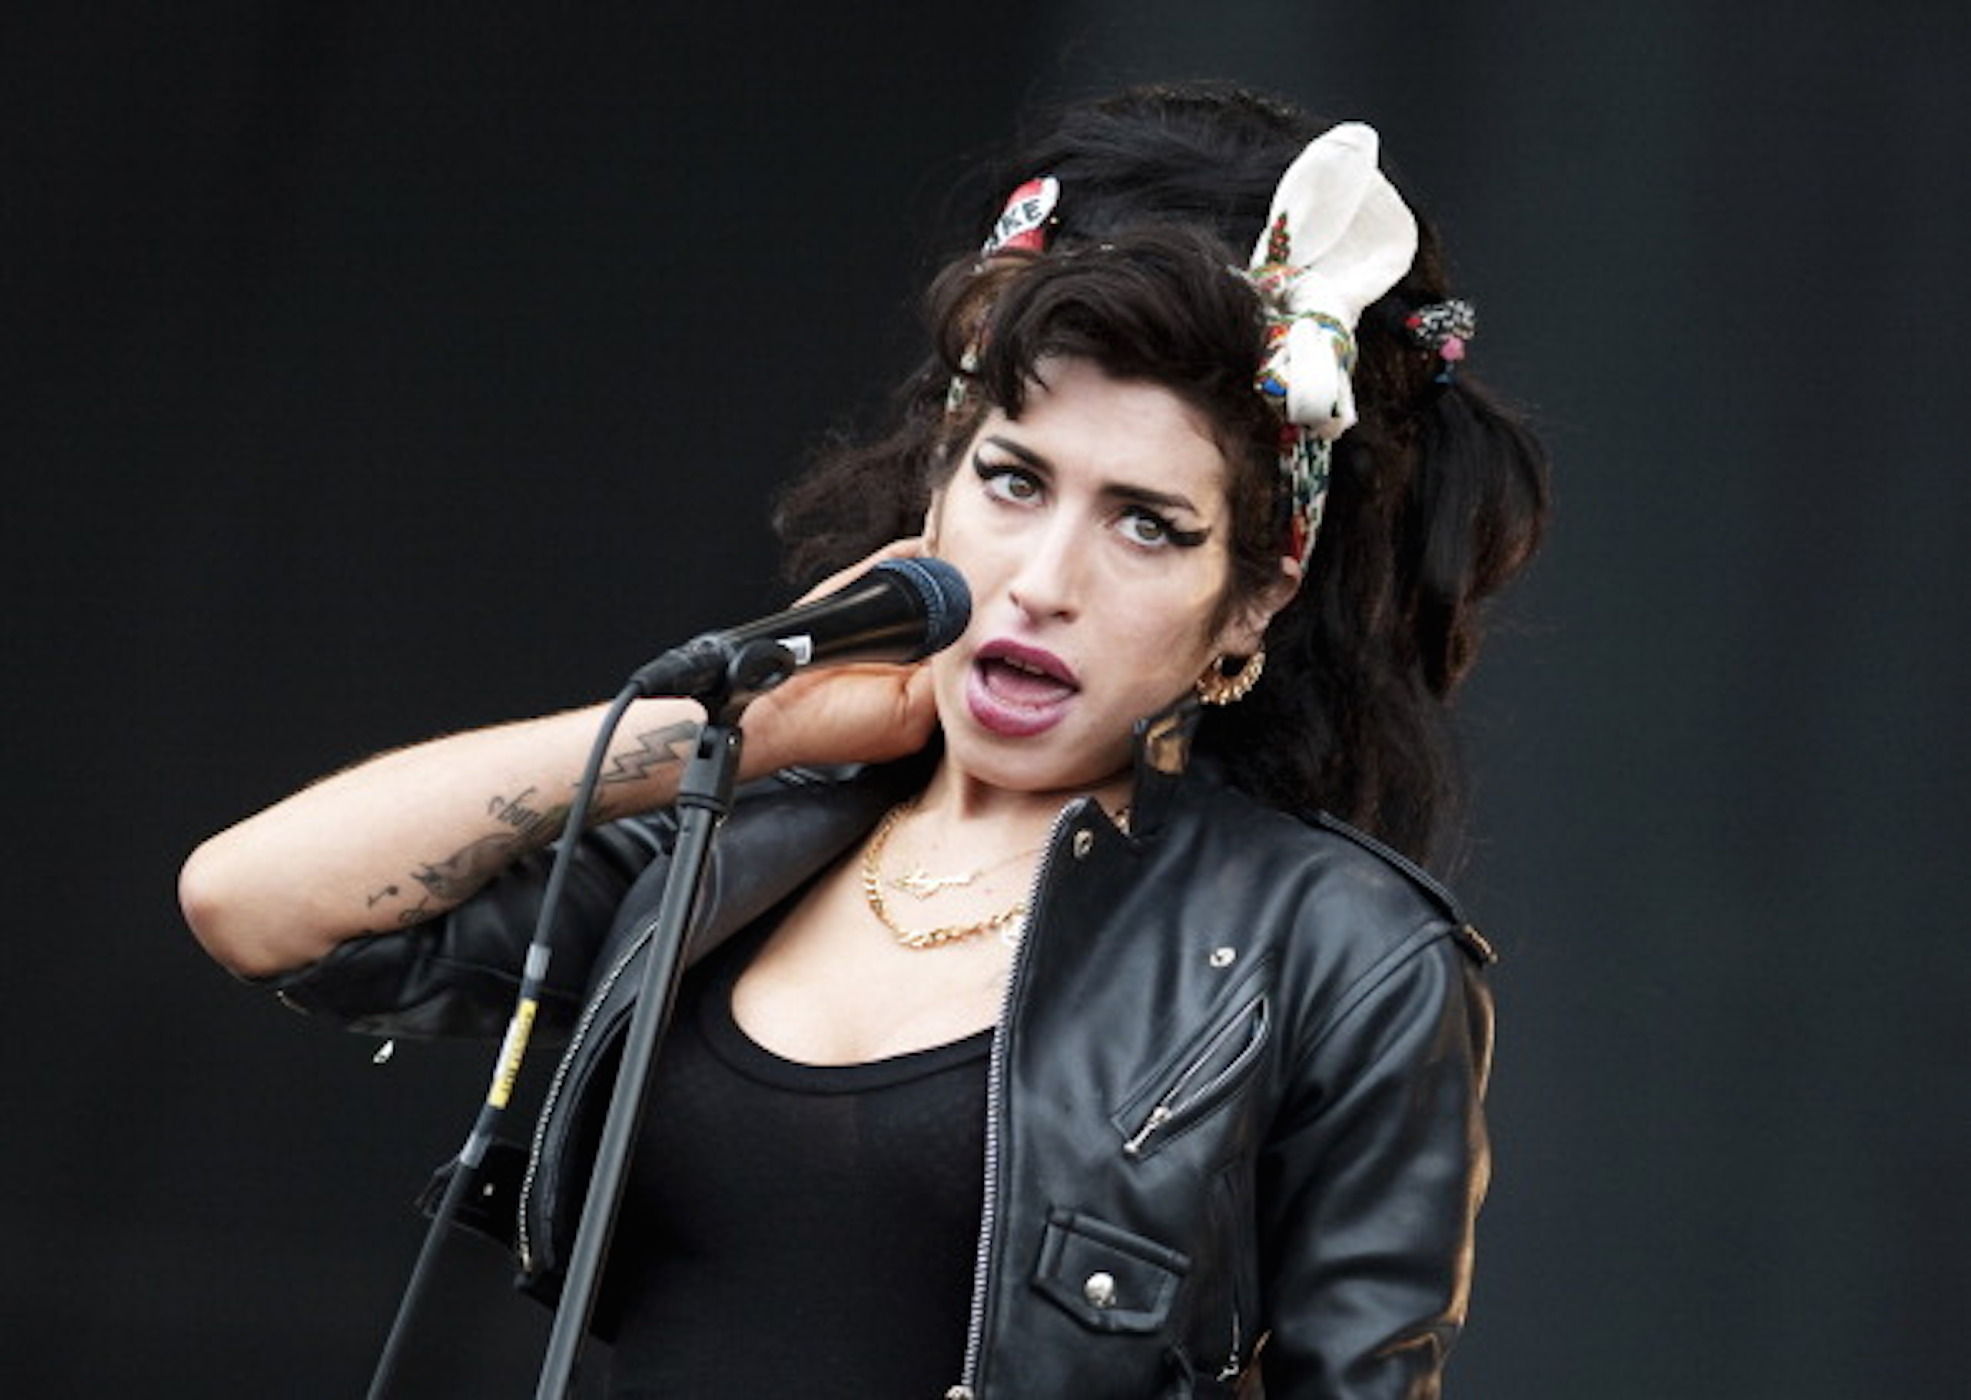 Amy Winehouse © Getty Images / Ross Gilmore